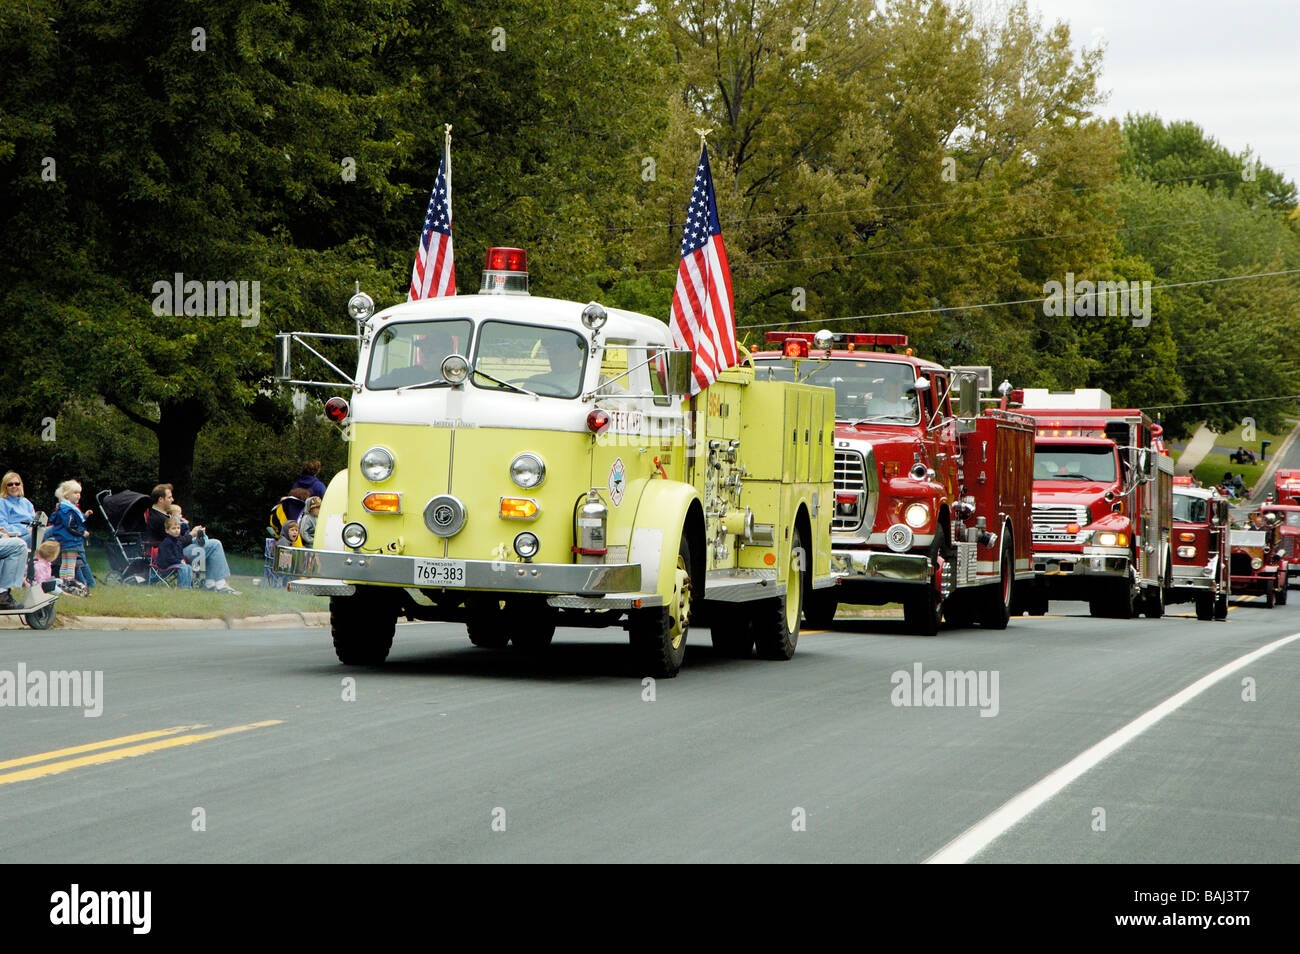 An antique fire department vehicle on display during a fire muster parade Stock Photo